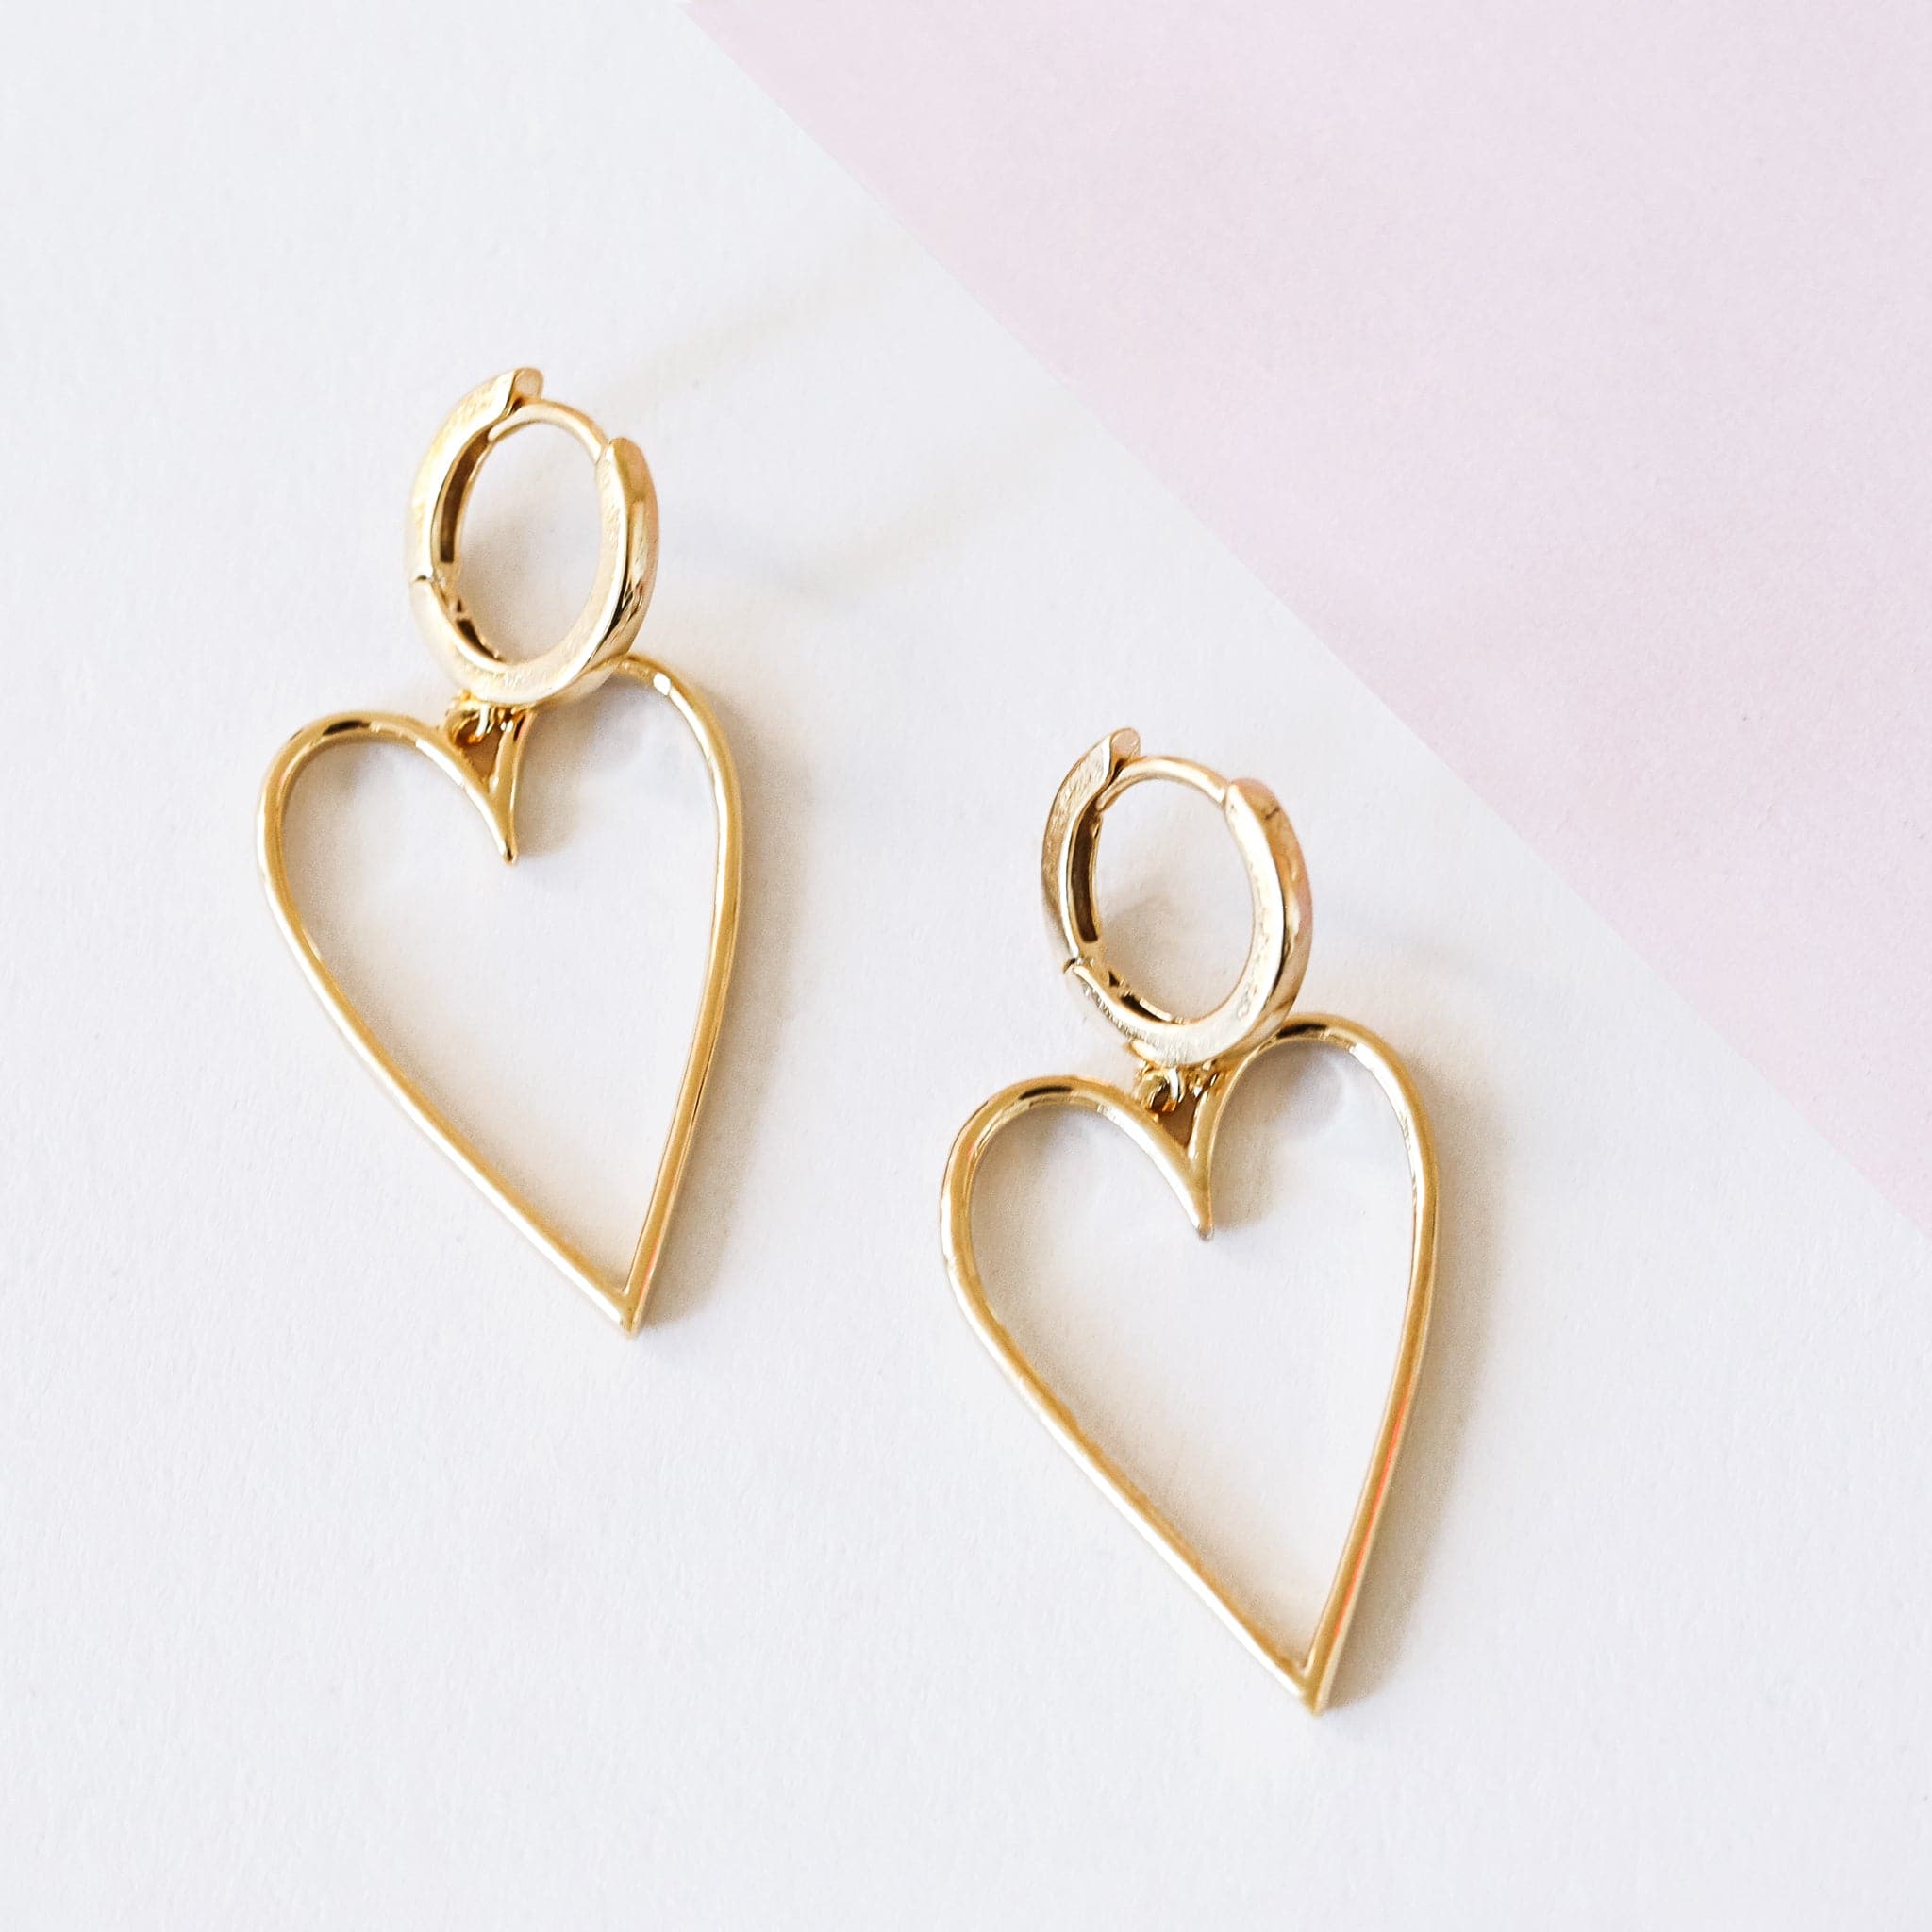 A pair of gold hoop earrings with a larger hold heart shape hoop attached to that.